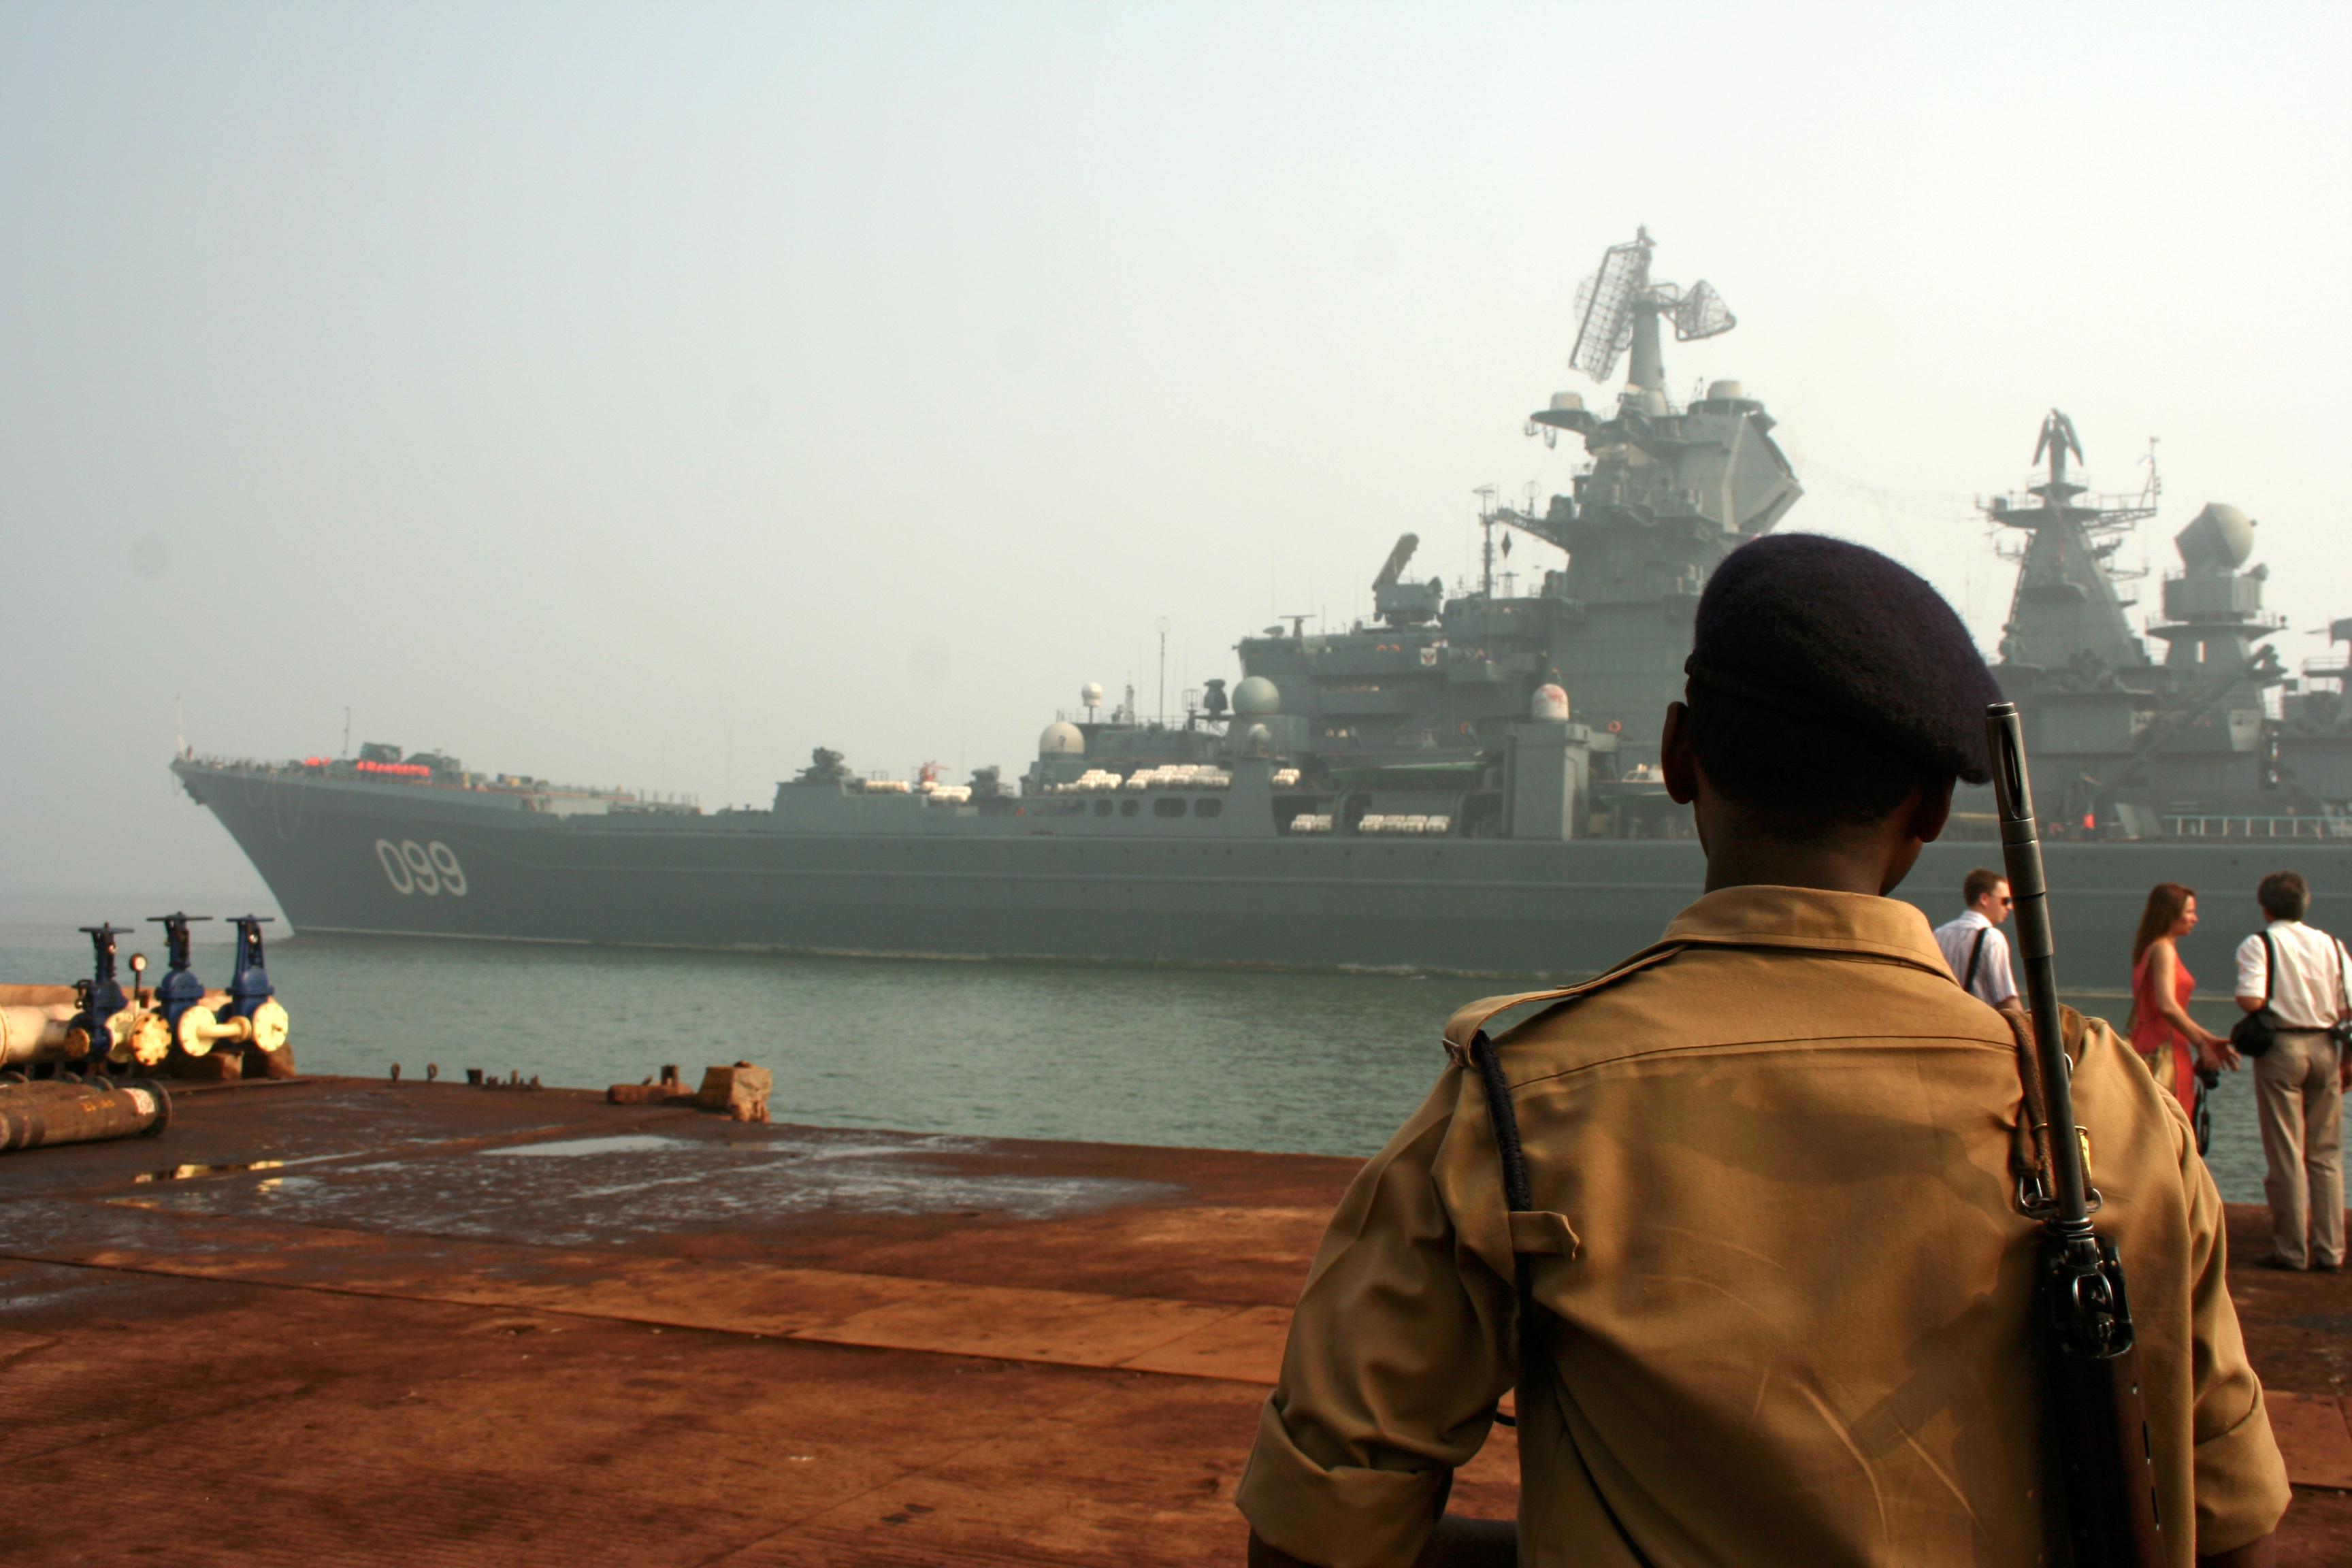 Maharashtra’s Dighi port may get Russian security system